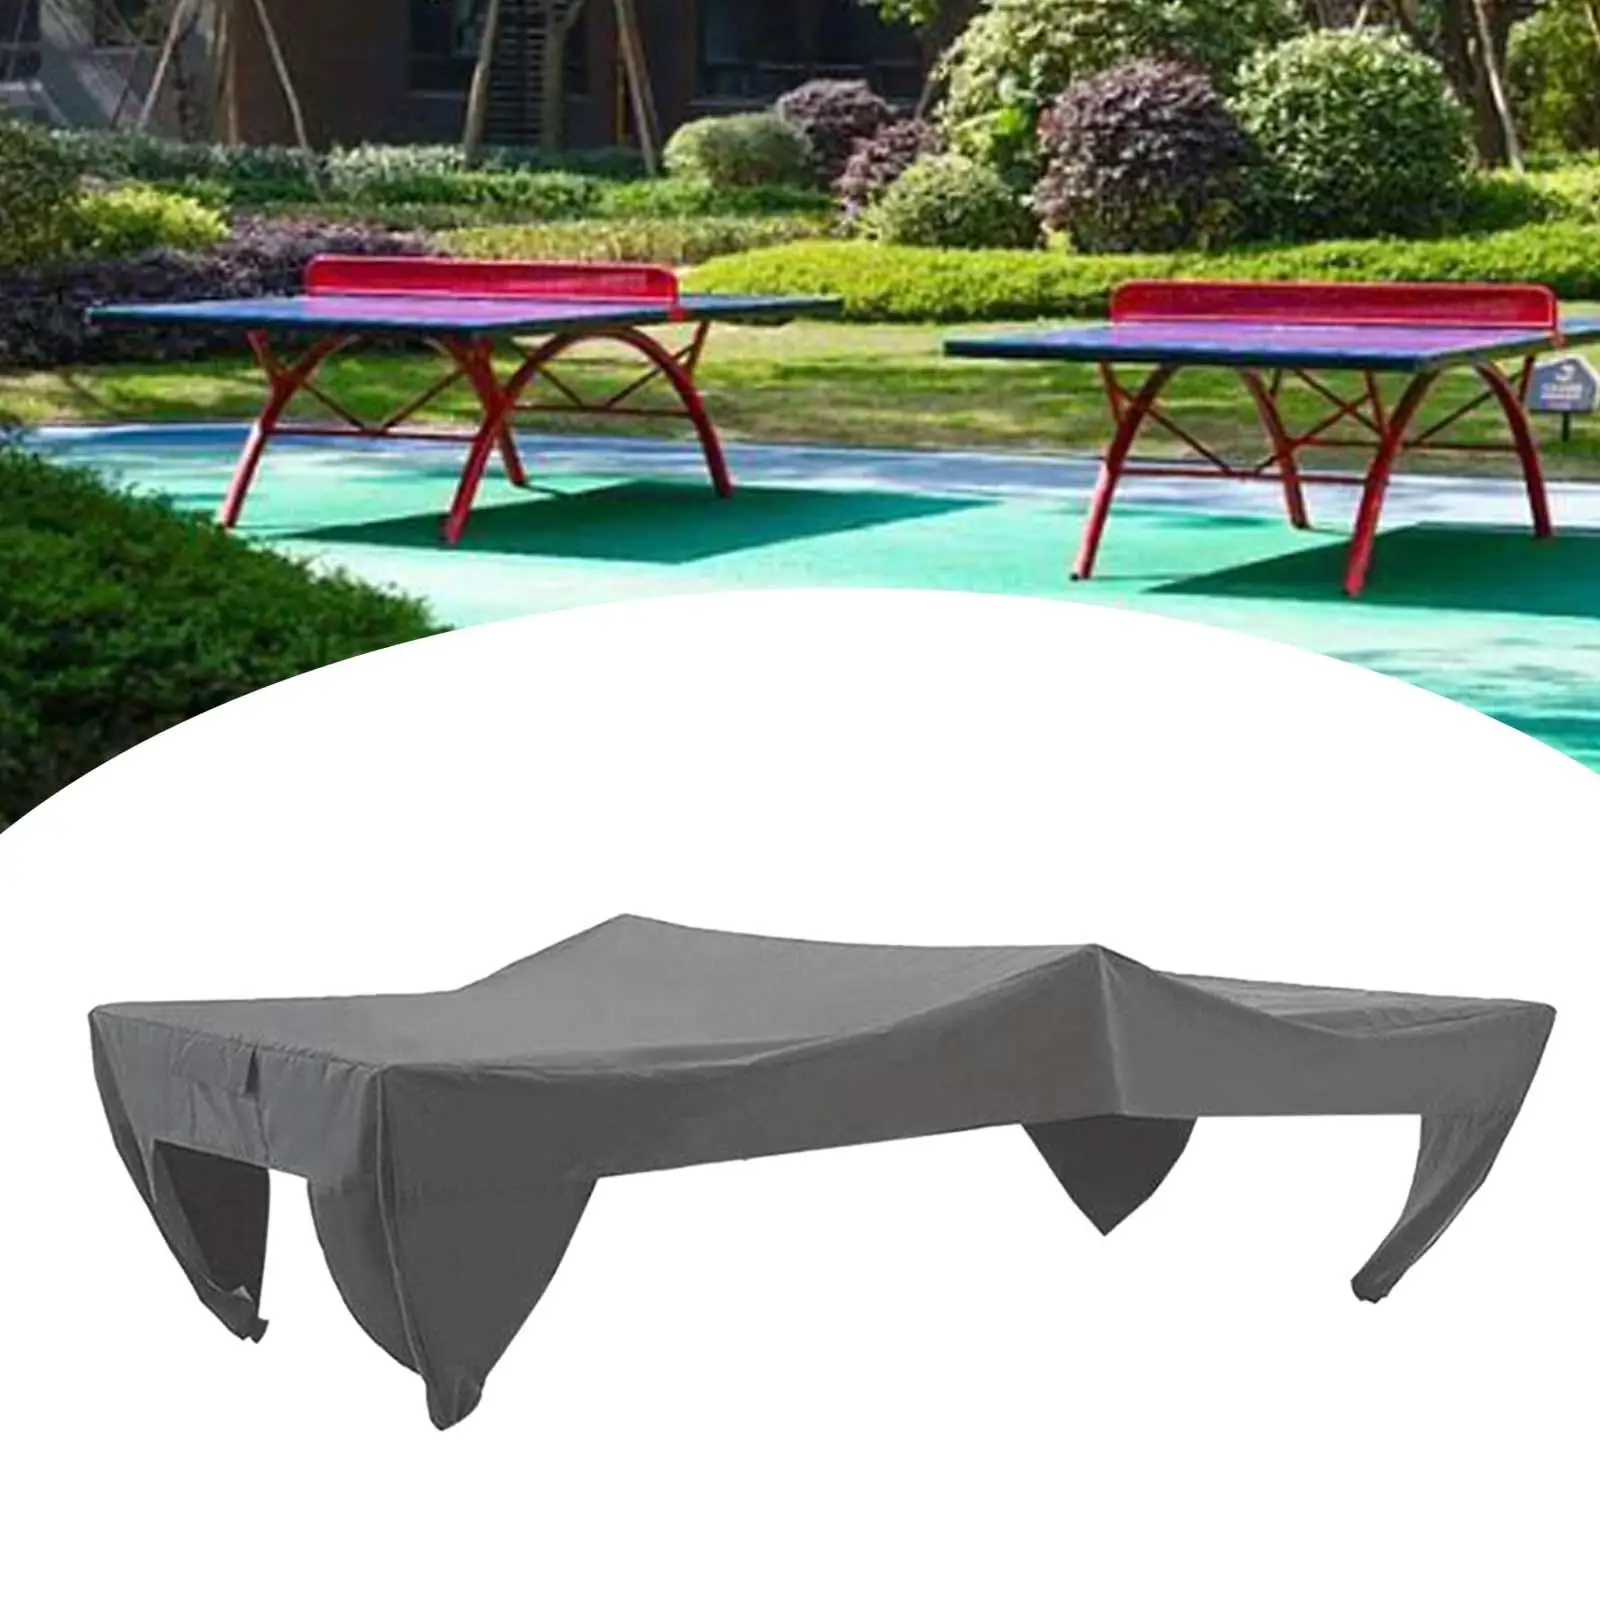 Table Tennis Cover Dust Cover Protective Cover Heavy Duty Reinforced Stitching Ping Pong Table Cover Premium for Ping Pong Table